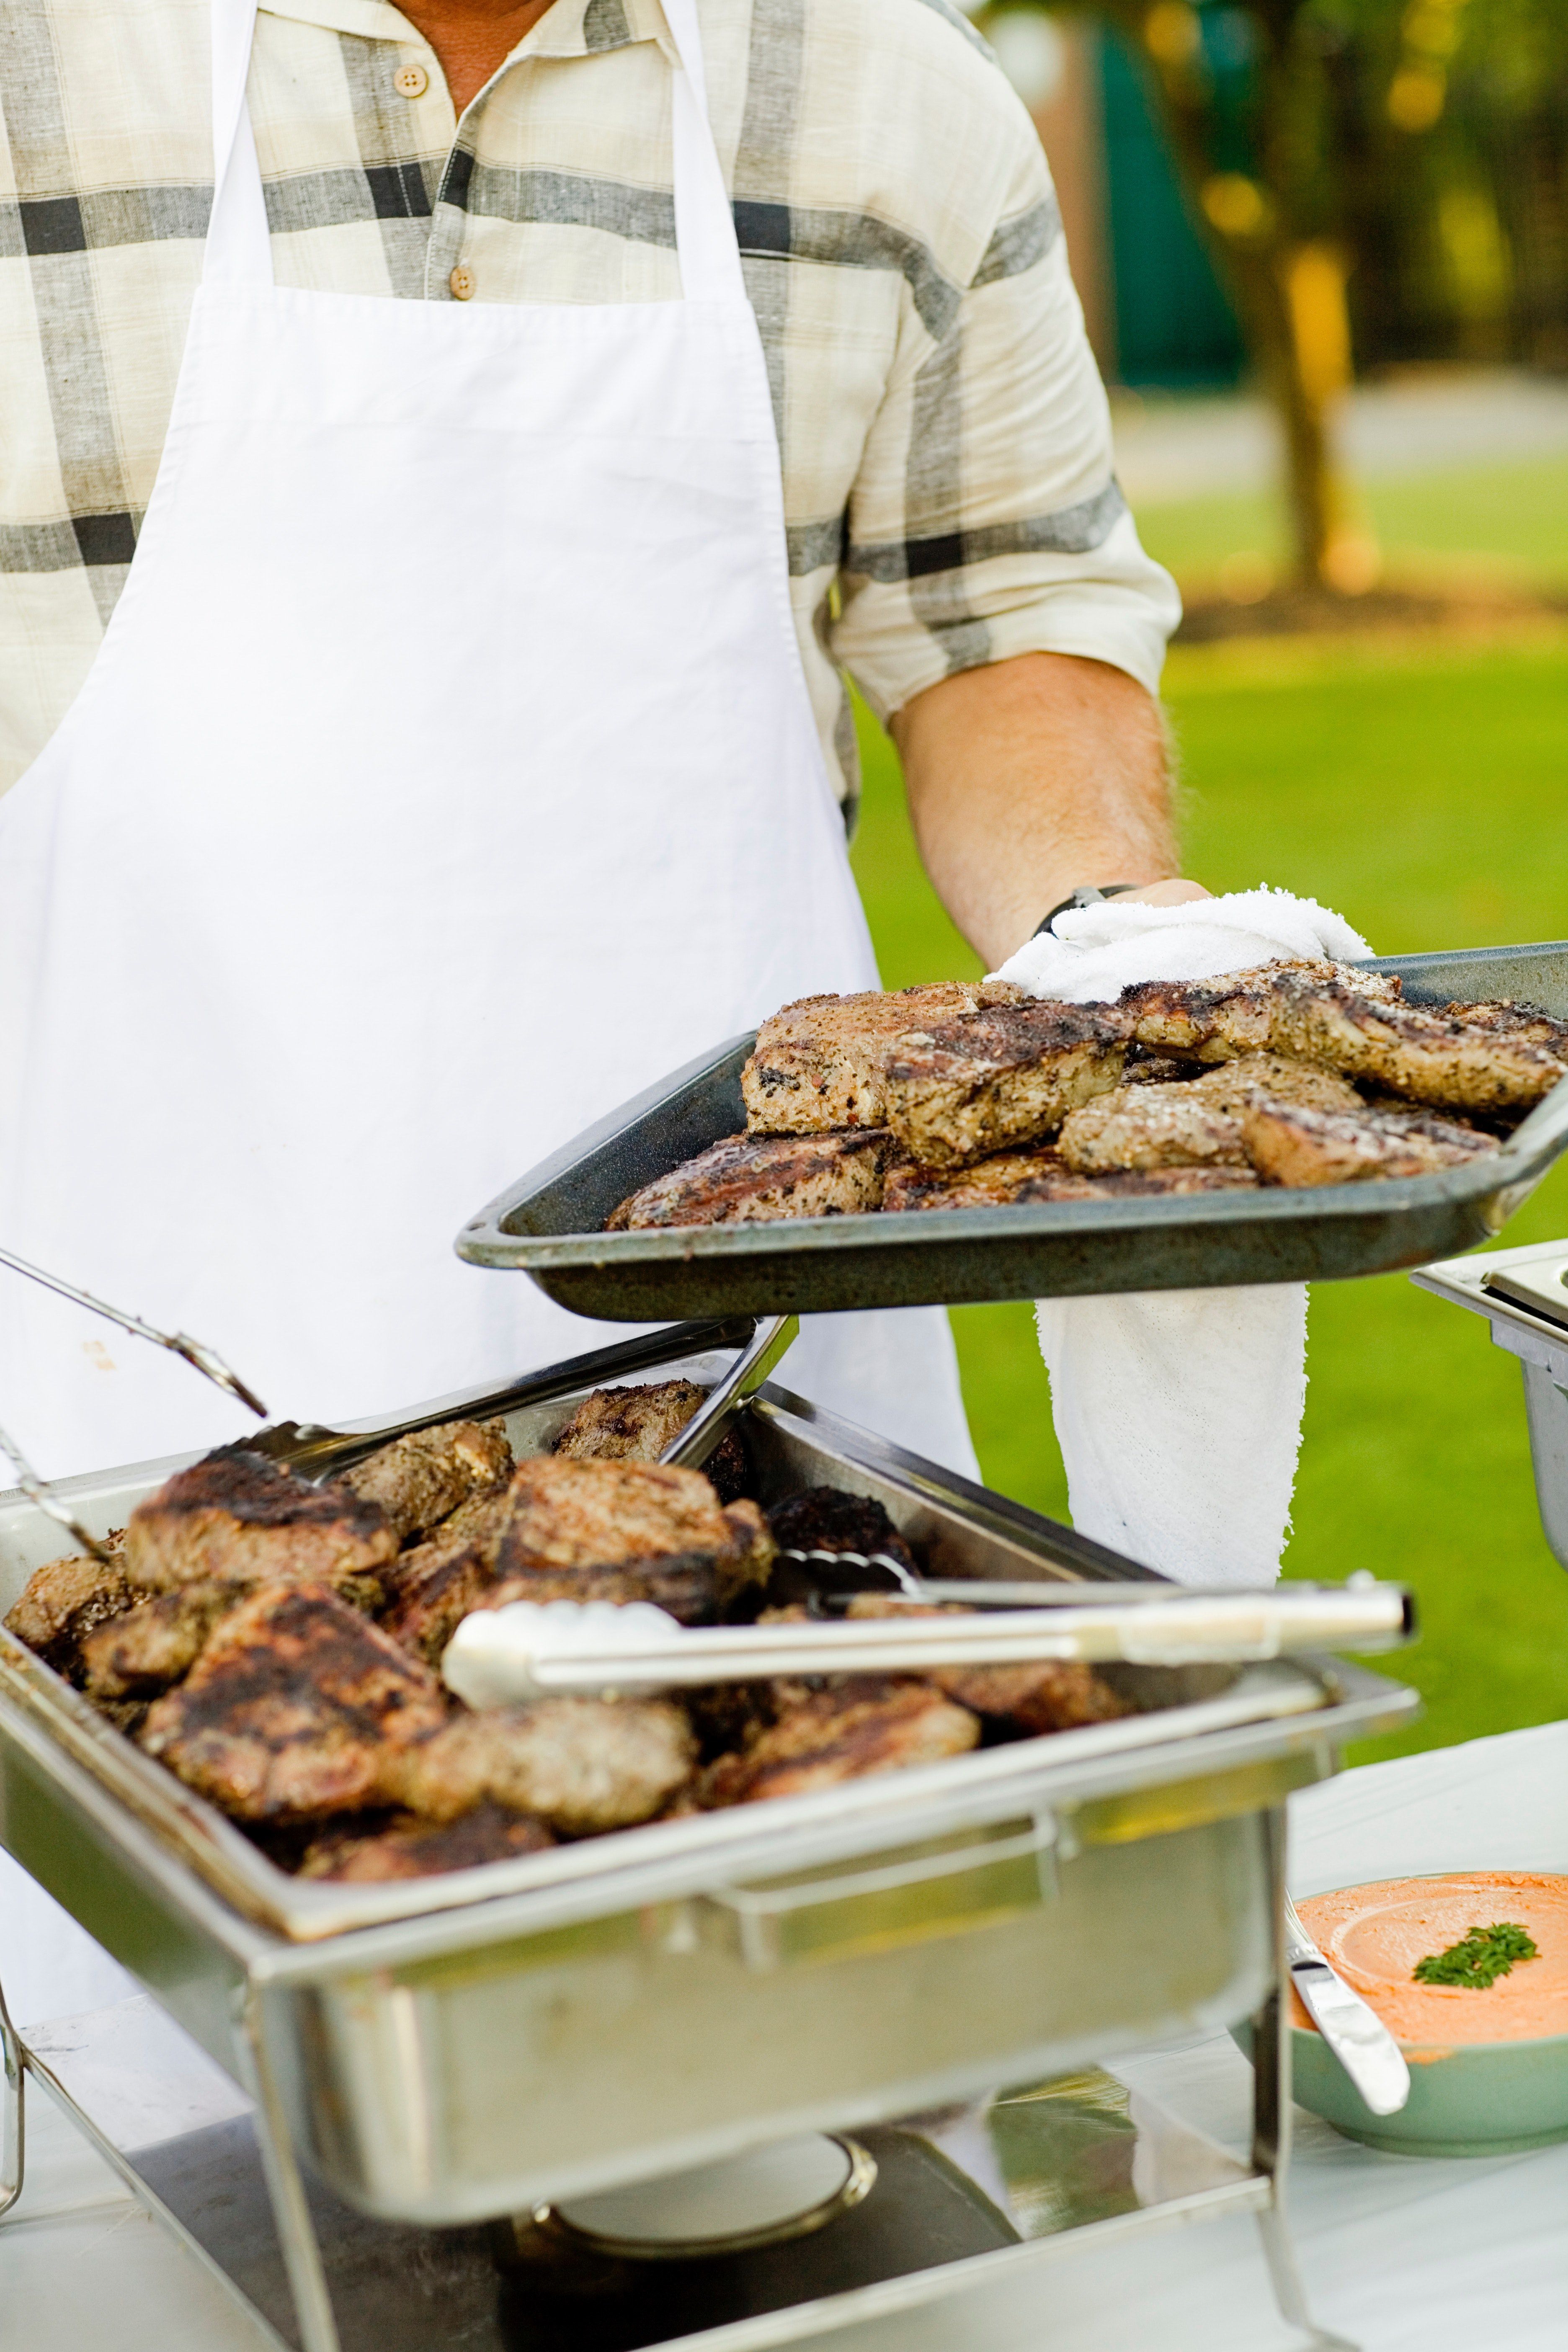 Wallpaper / a man wearing a white apron setting up a catering table of bbq food, cooking meat 4k wallpaper